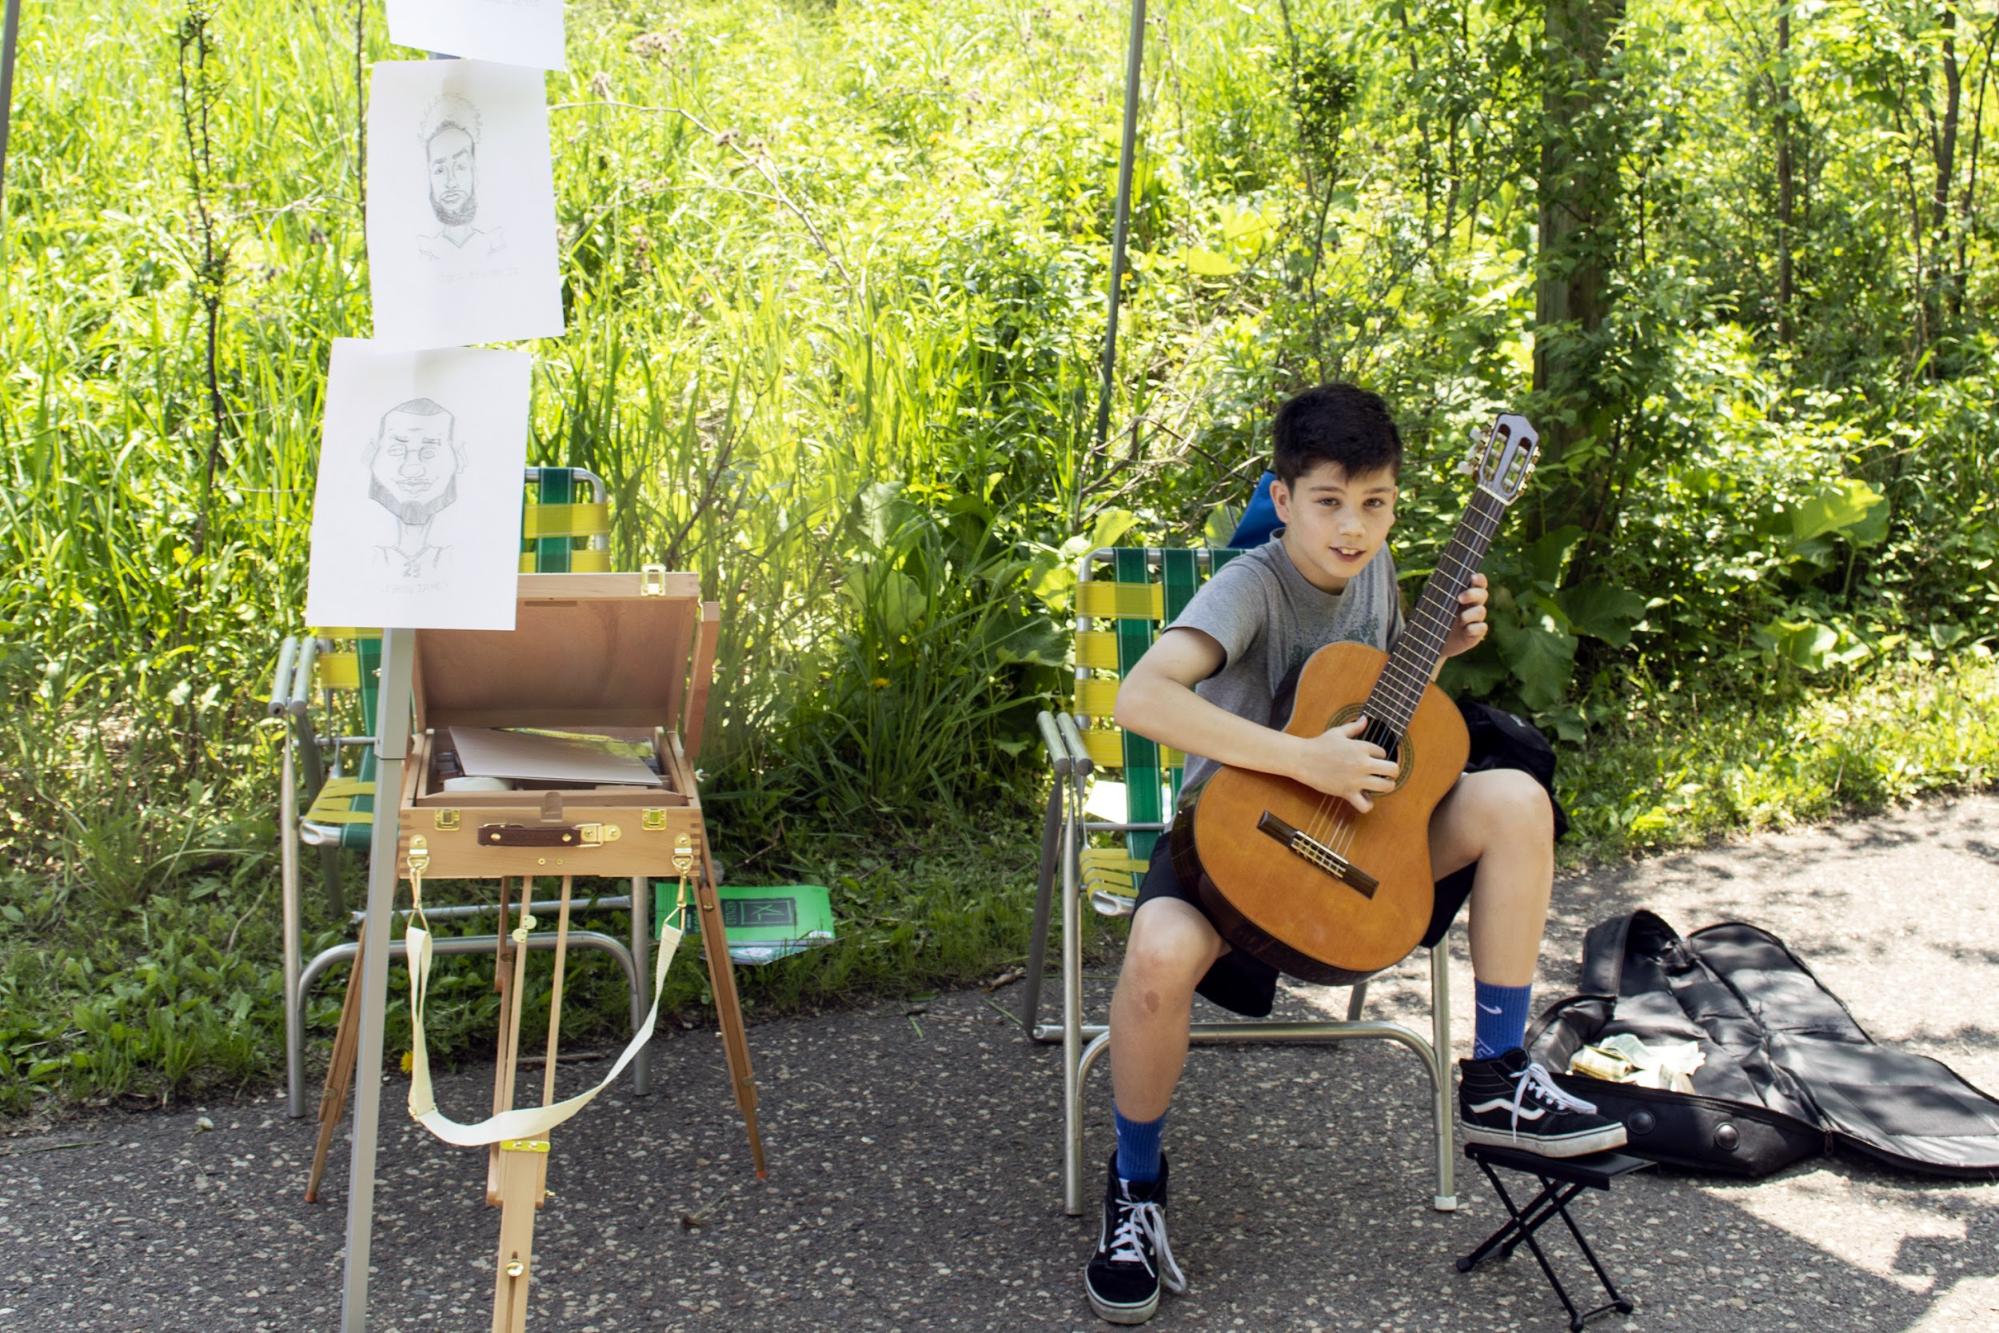 Henry Colin, an 11-year-old artist and musician, plays guitar at Art in the Hollow. Colin also drew caricatures at this year’s event. (Mandy Hathaway / The Metropolitan)